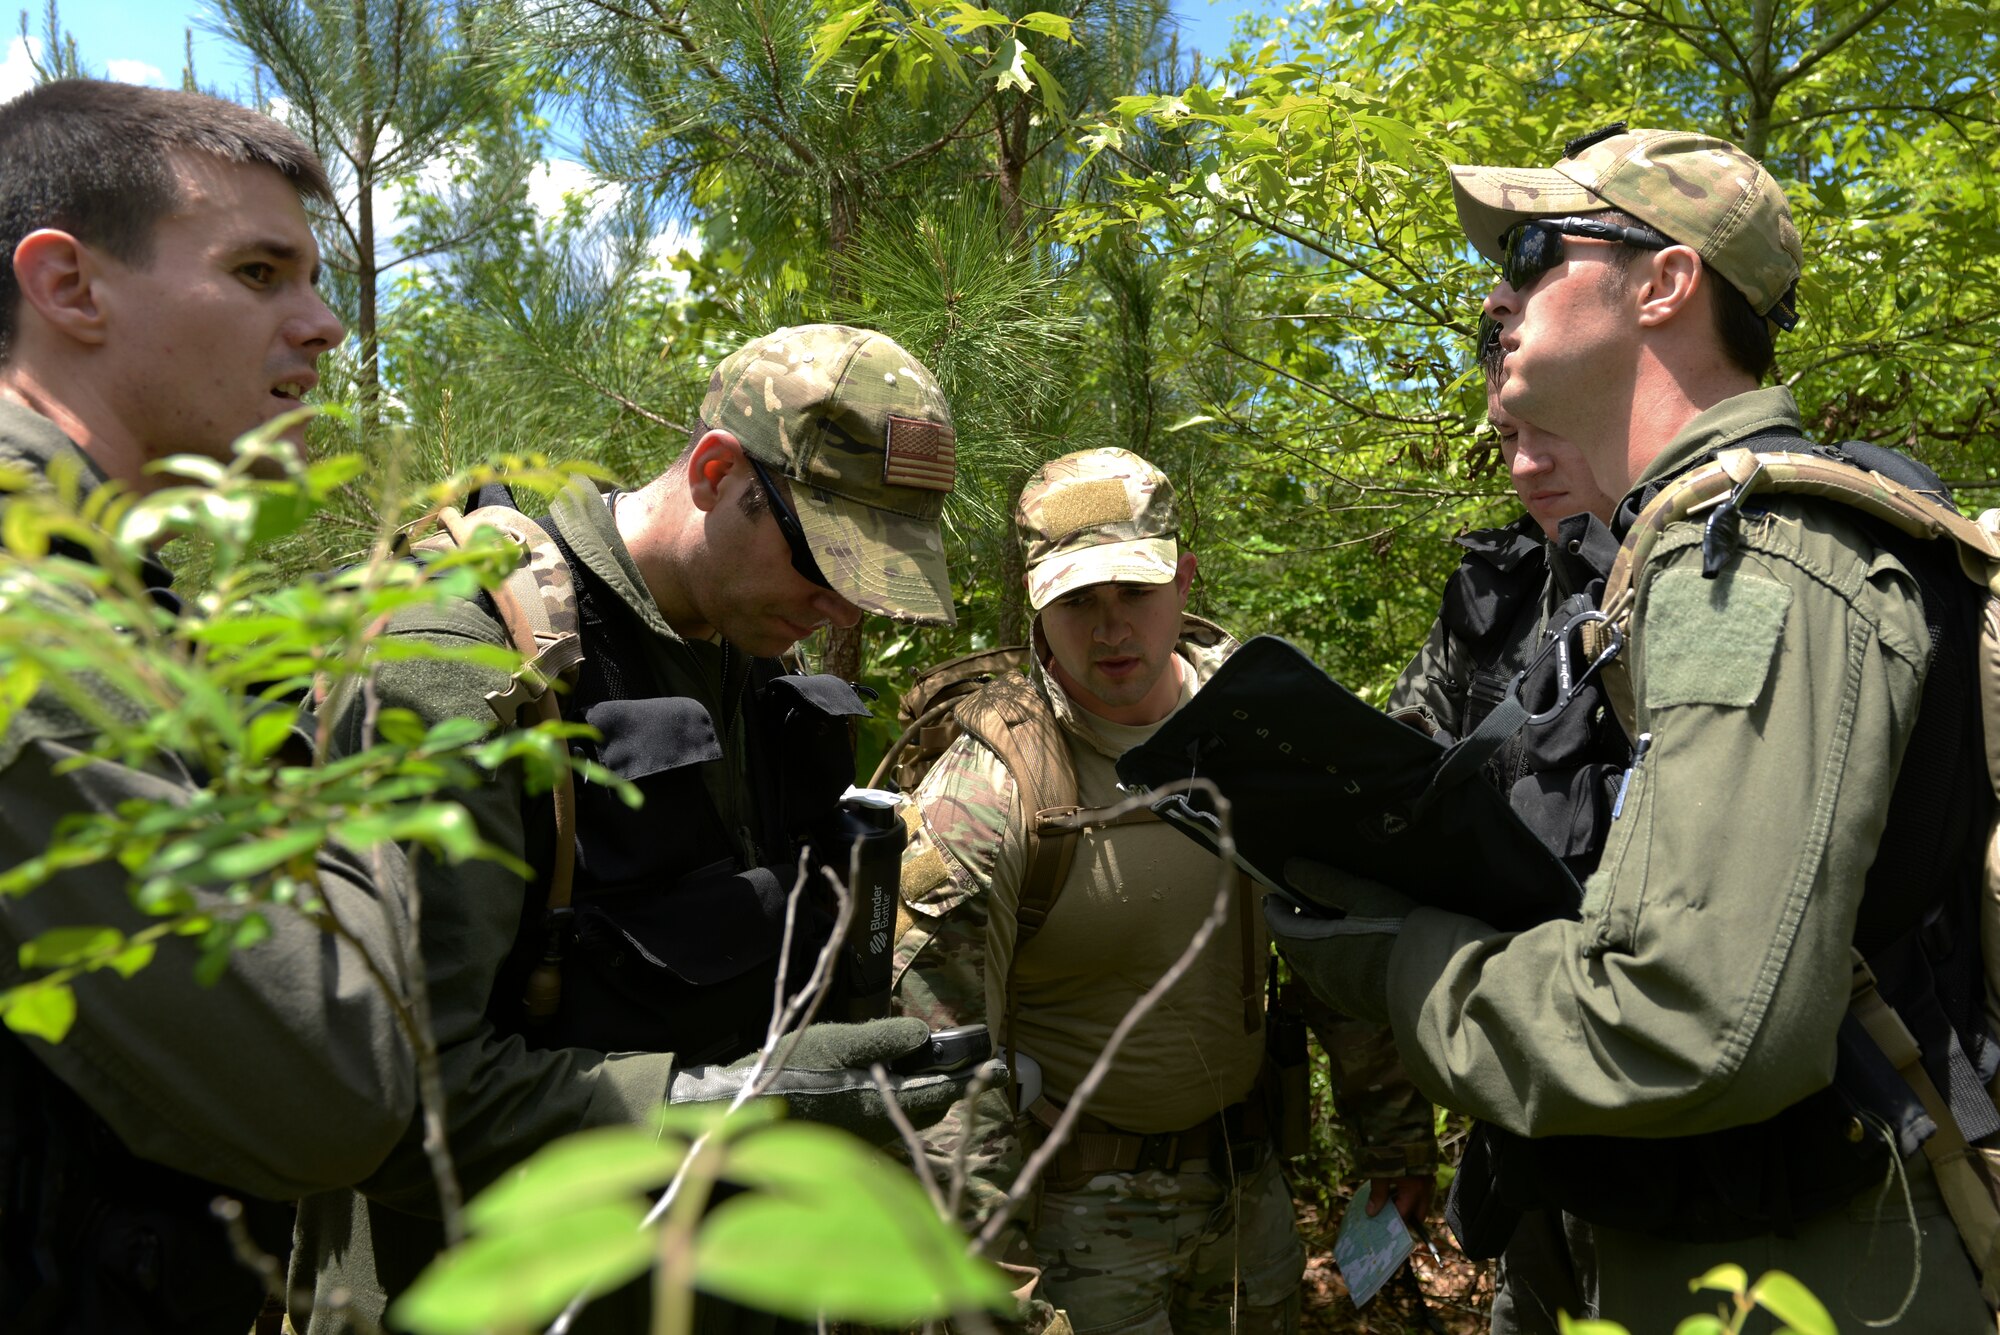 U.S. Air Force Airmen review a topographic map during a survival, evasion, resistance and escape exercise April 22, 2016, near Ft. Polk, La. The C-130J aircrew recovered airdropped supplies while awaiting rescue by U.S. service members. (U.S. Air Force photo by Airman 1st Class Mercedes Taylor) 